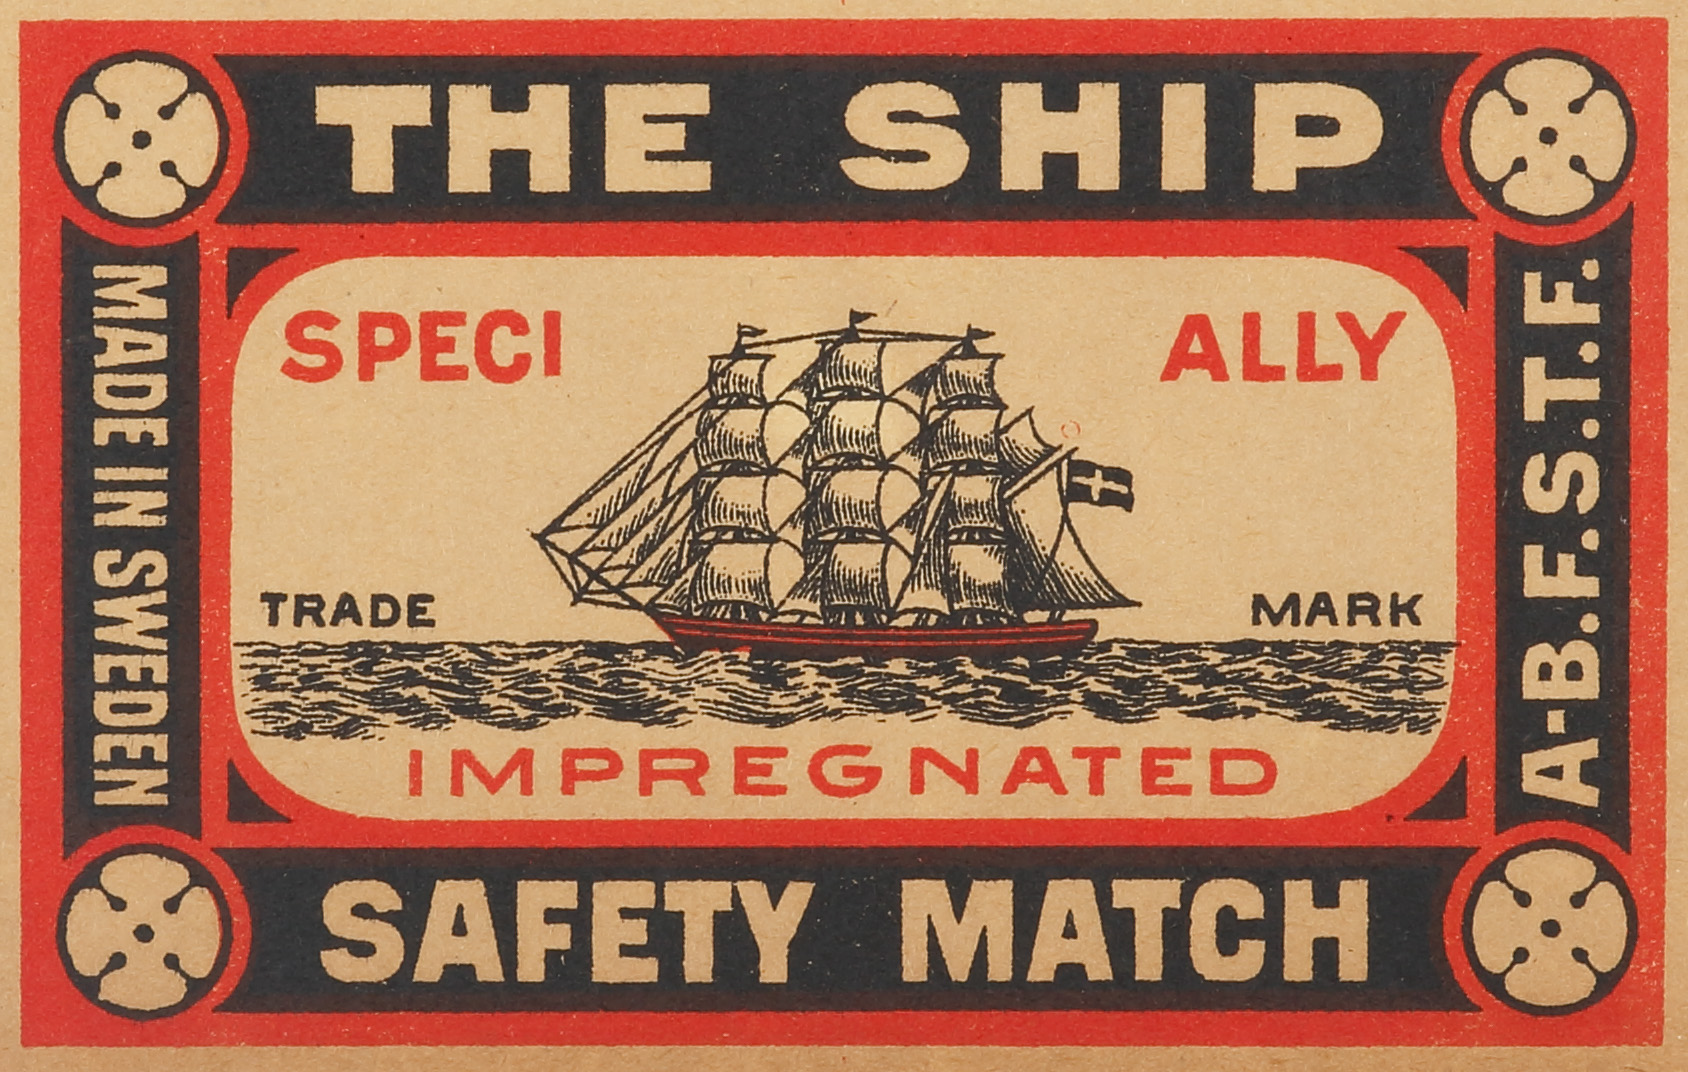 The Ship Specially Impregnated Safety Match. - Antique Print from 1900